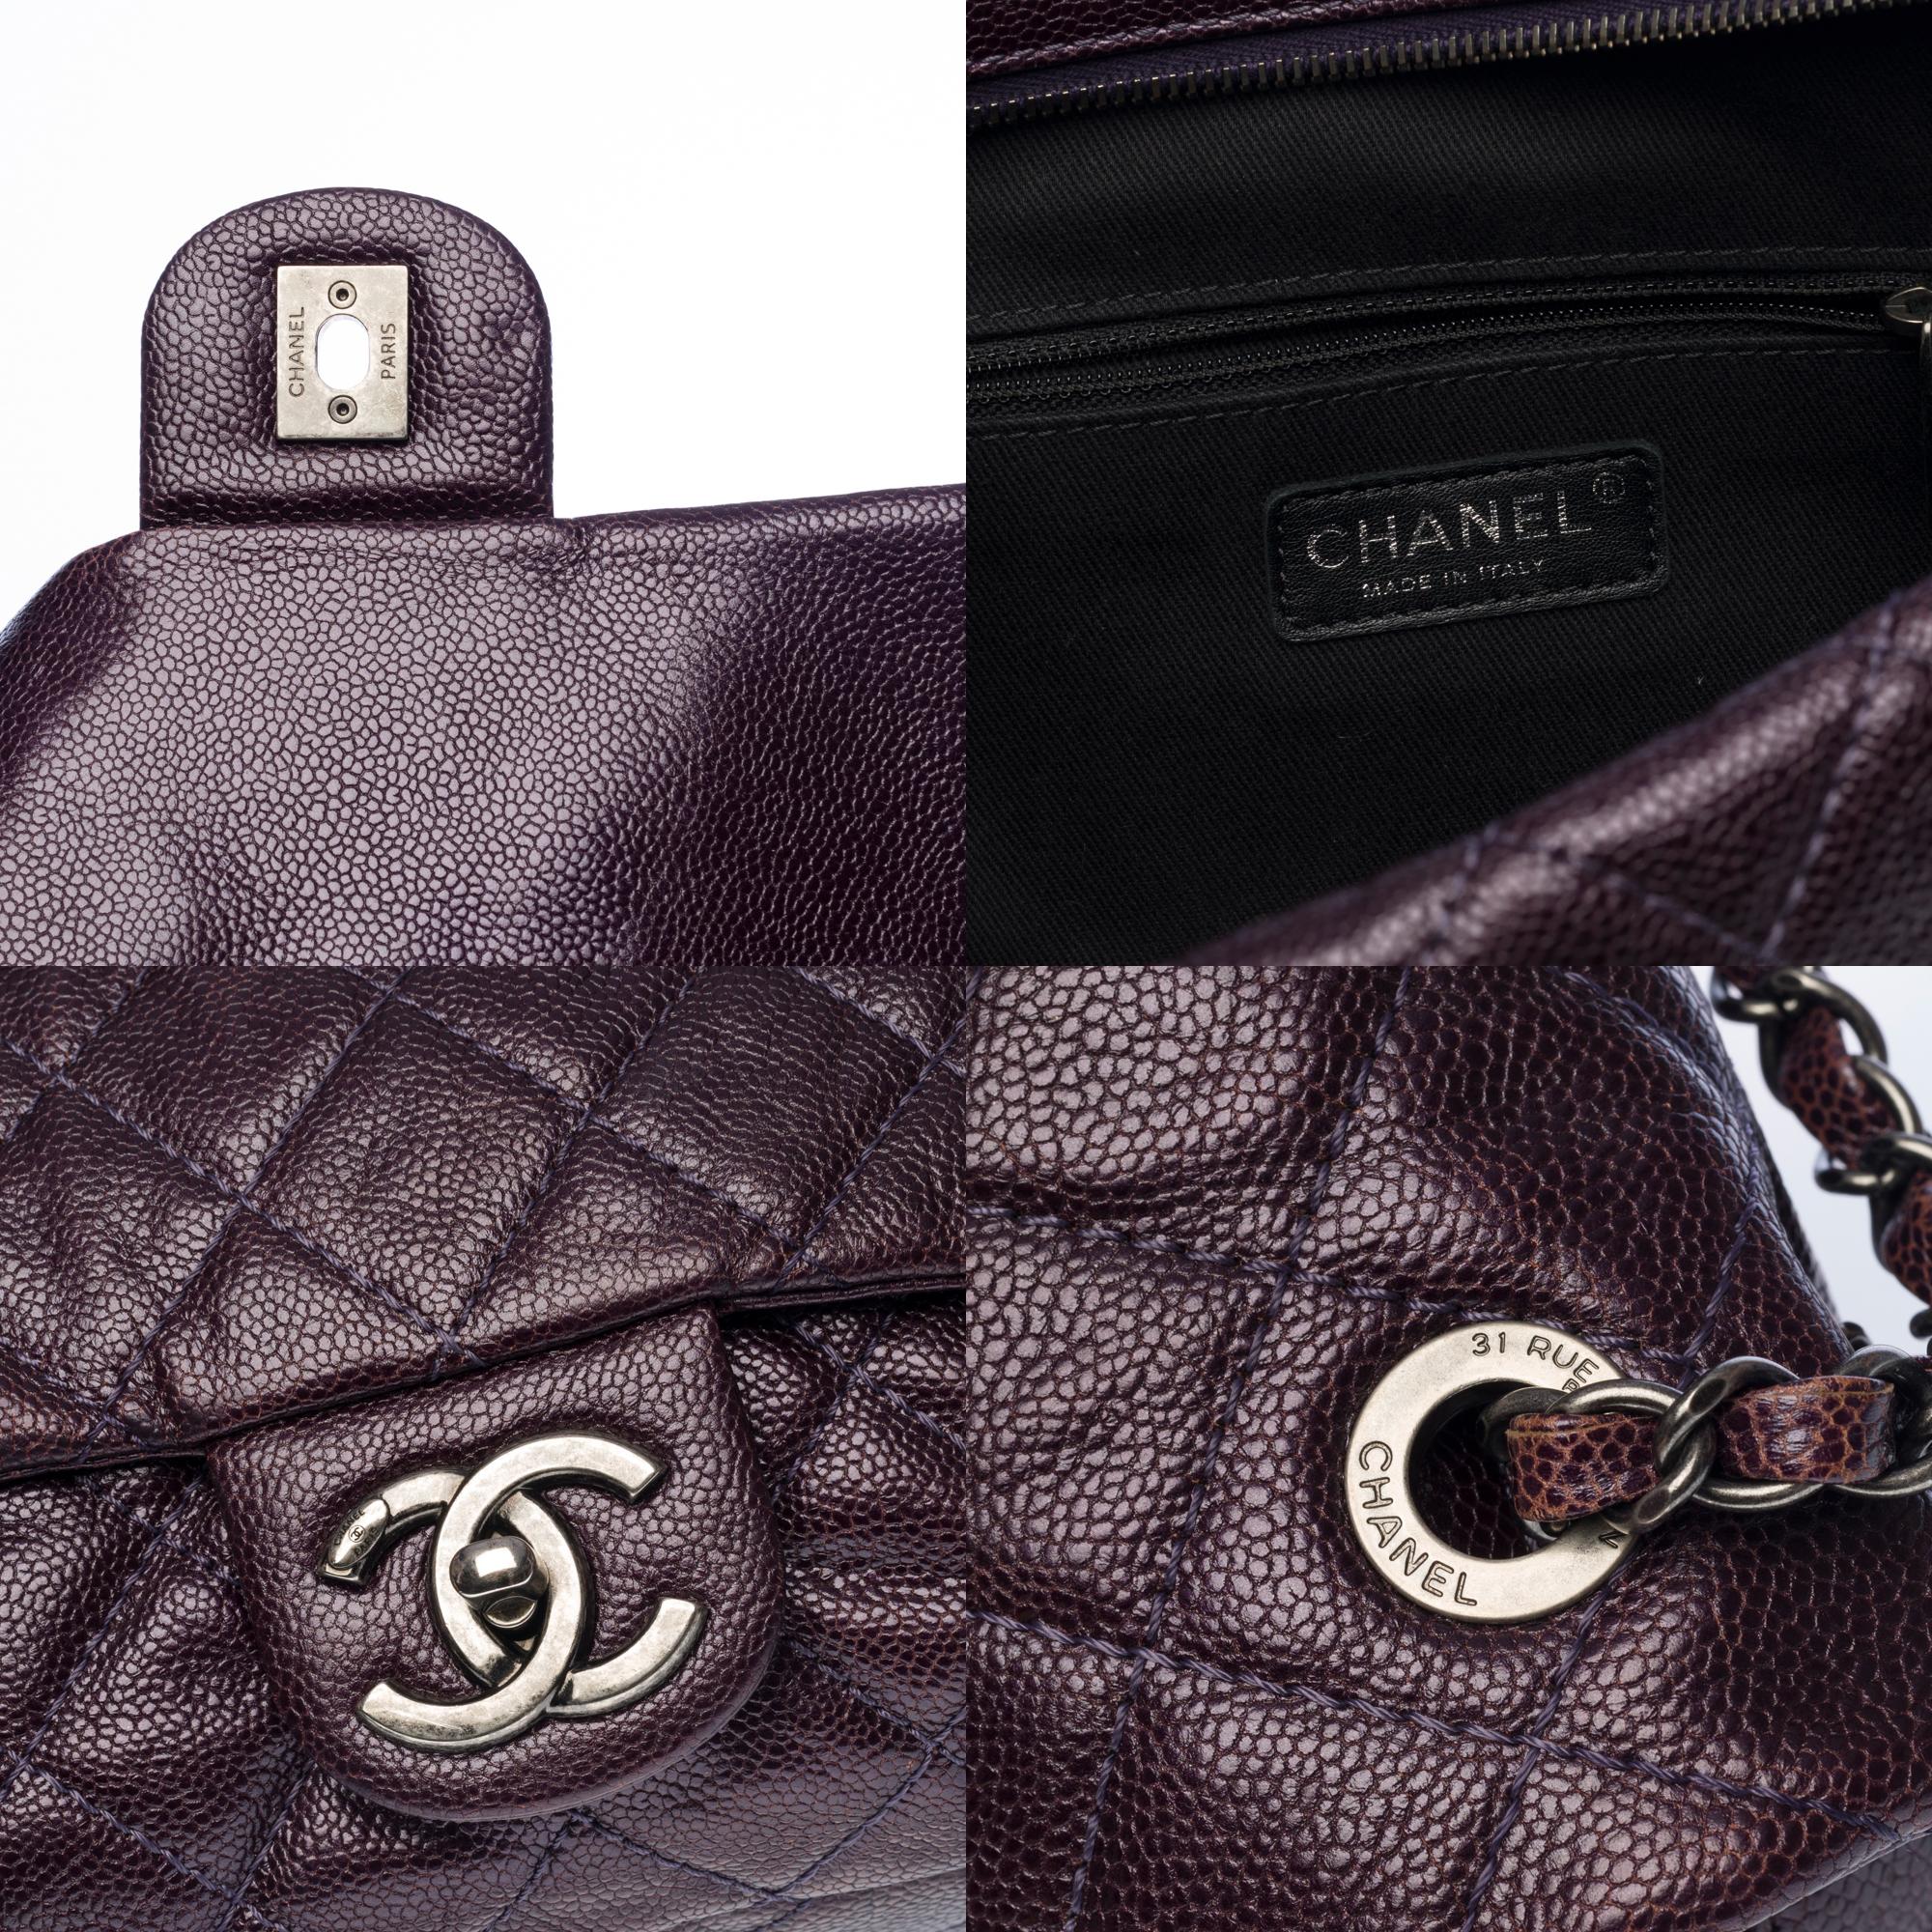 Women's Stunning Chanel Classic shoulder flap bag in purple caviar leather, SHW